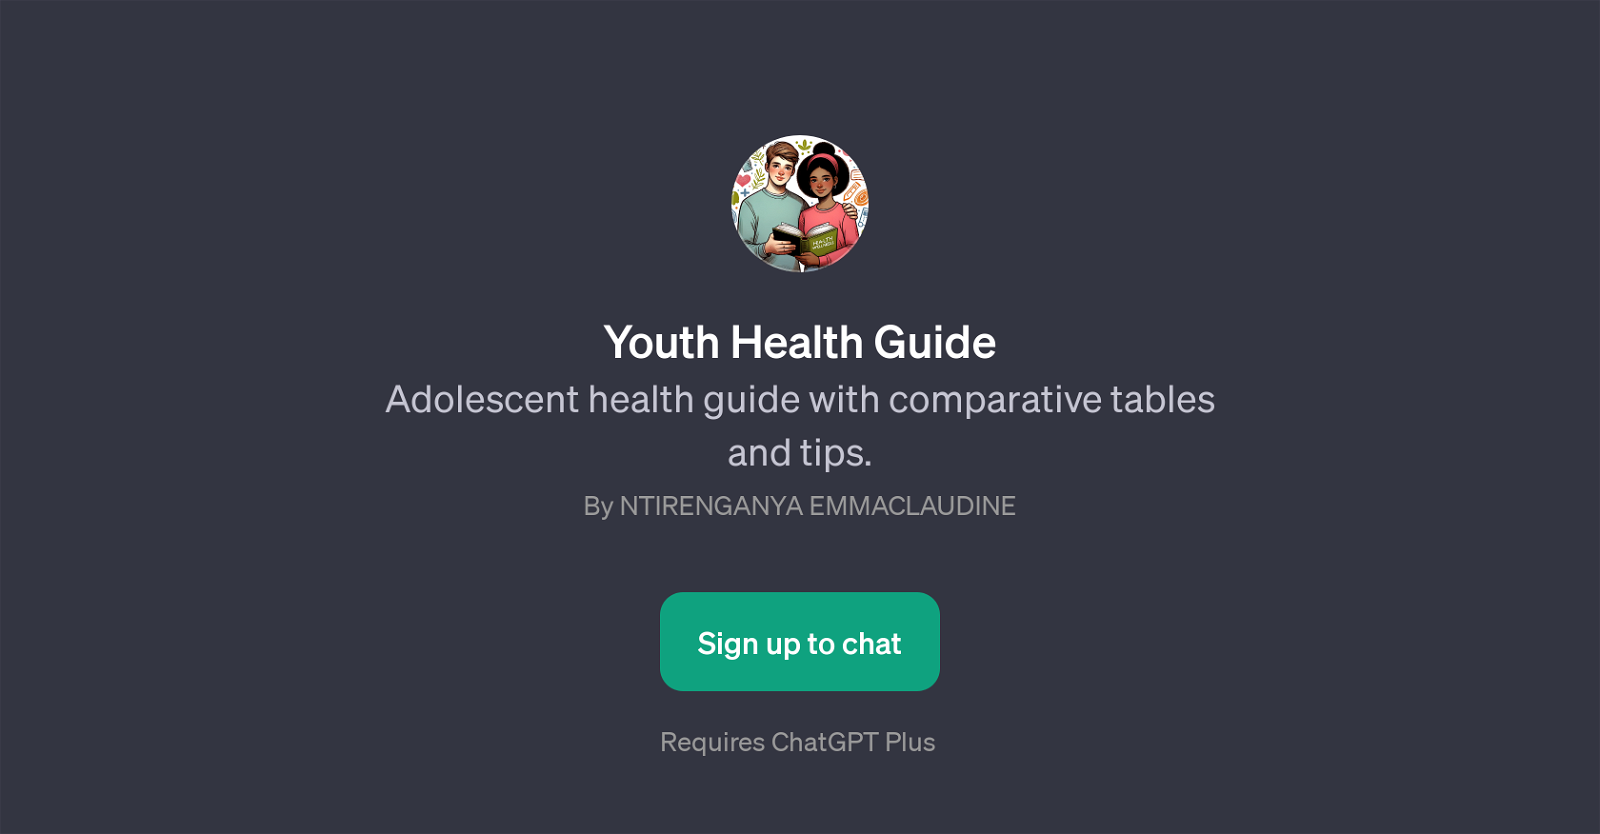 Youth Health Guide website